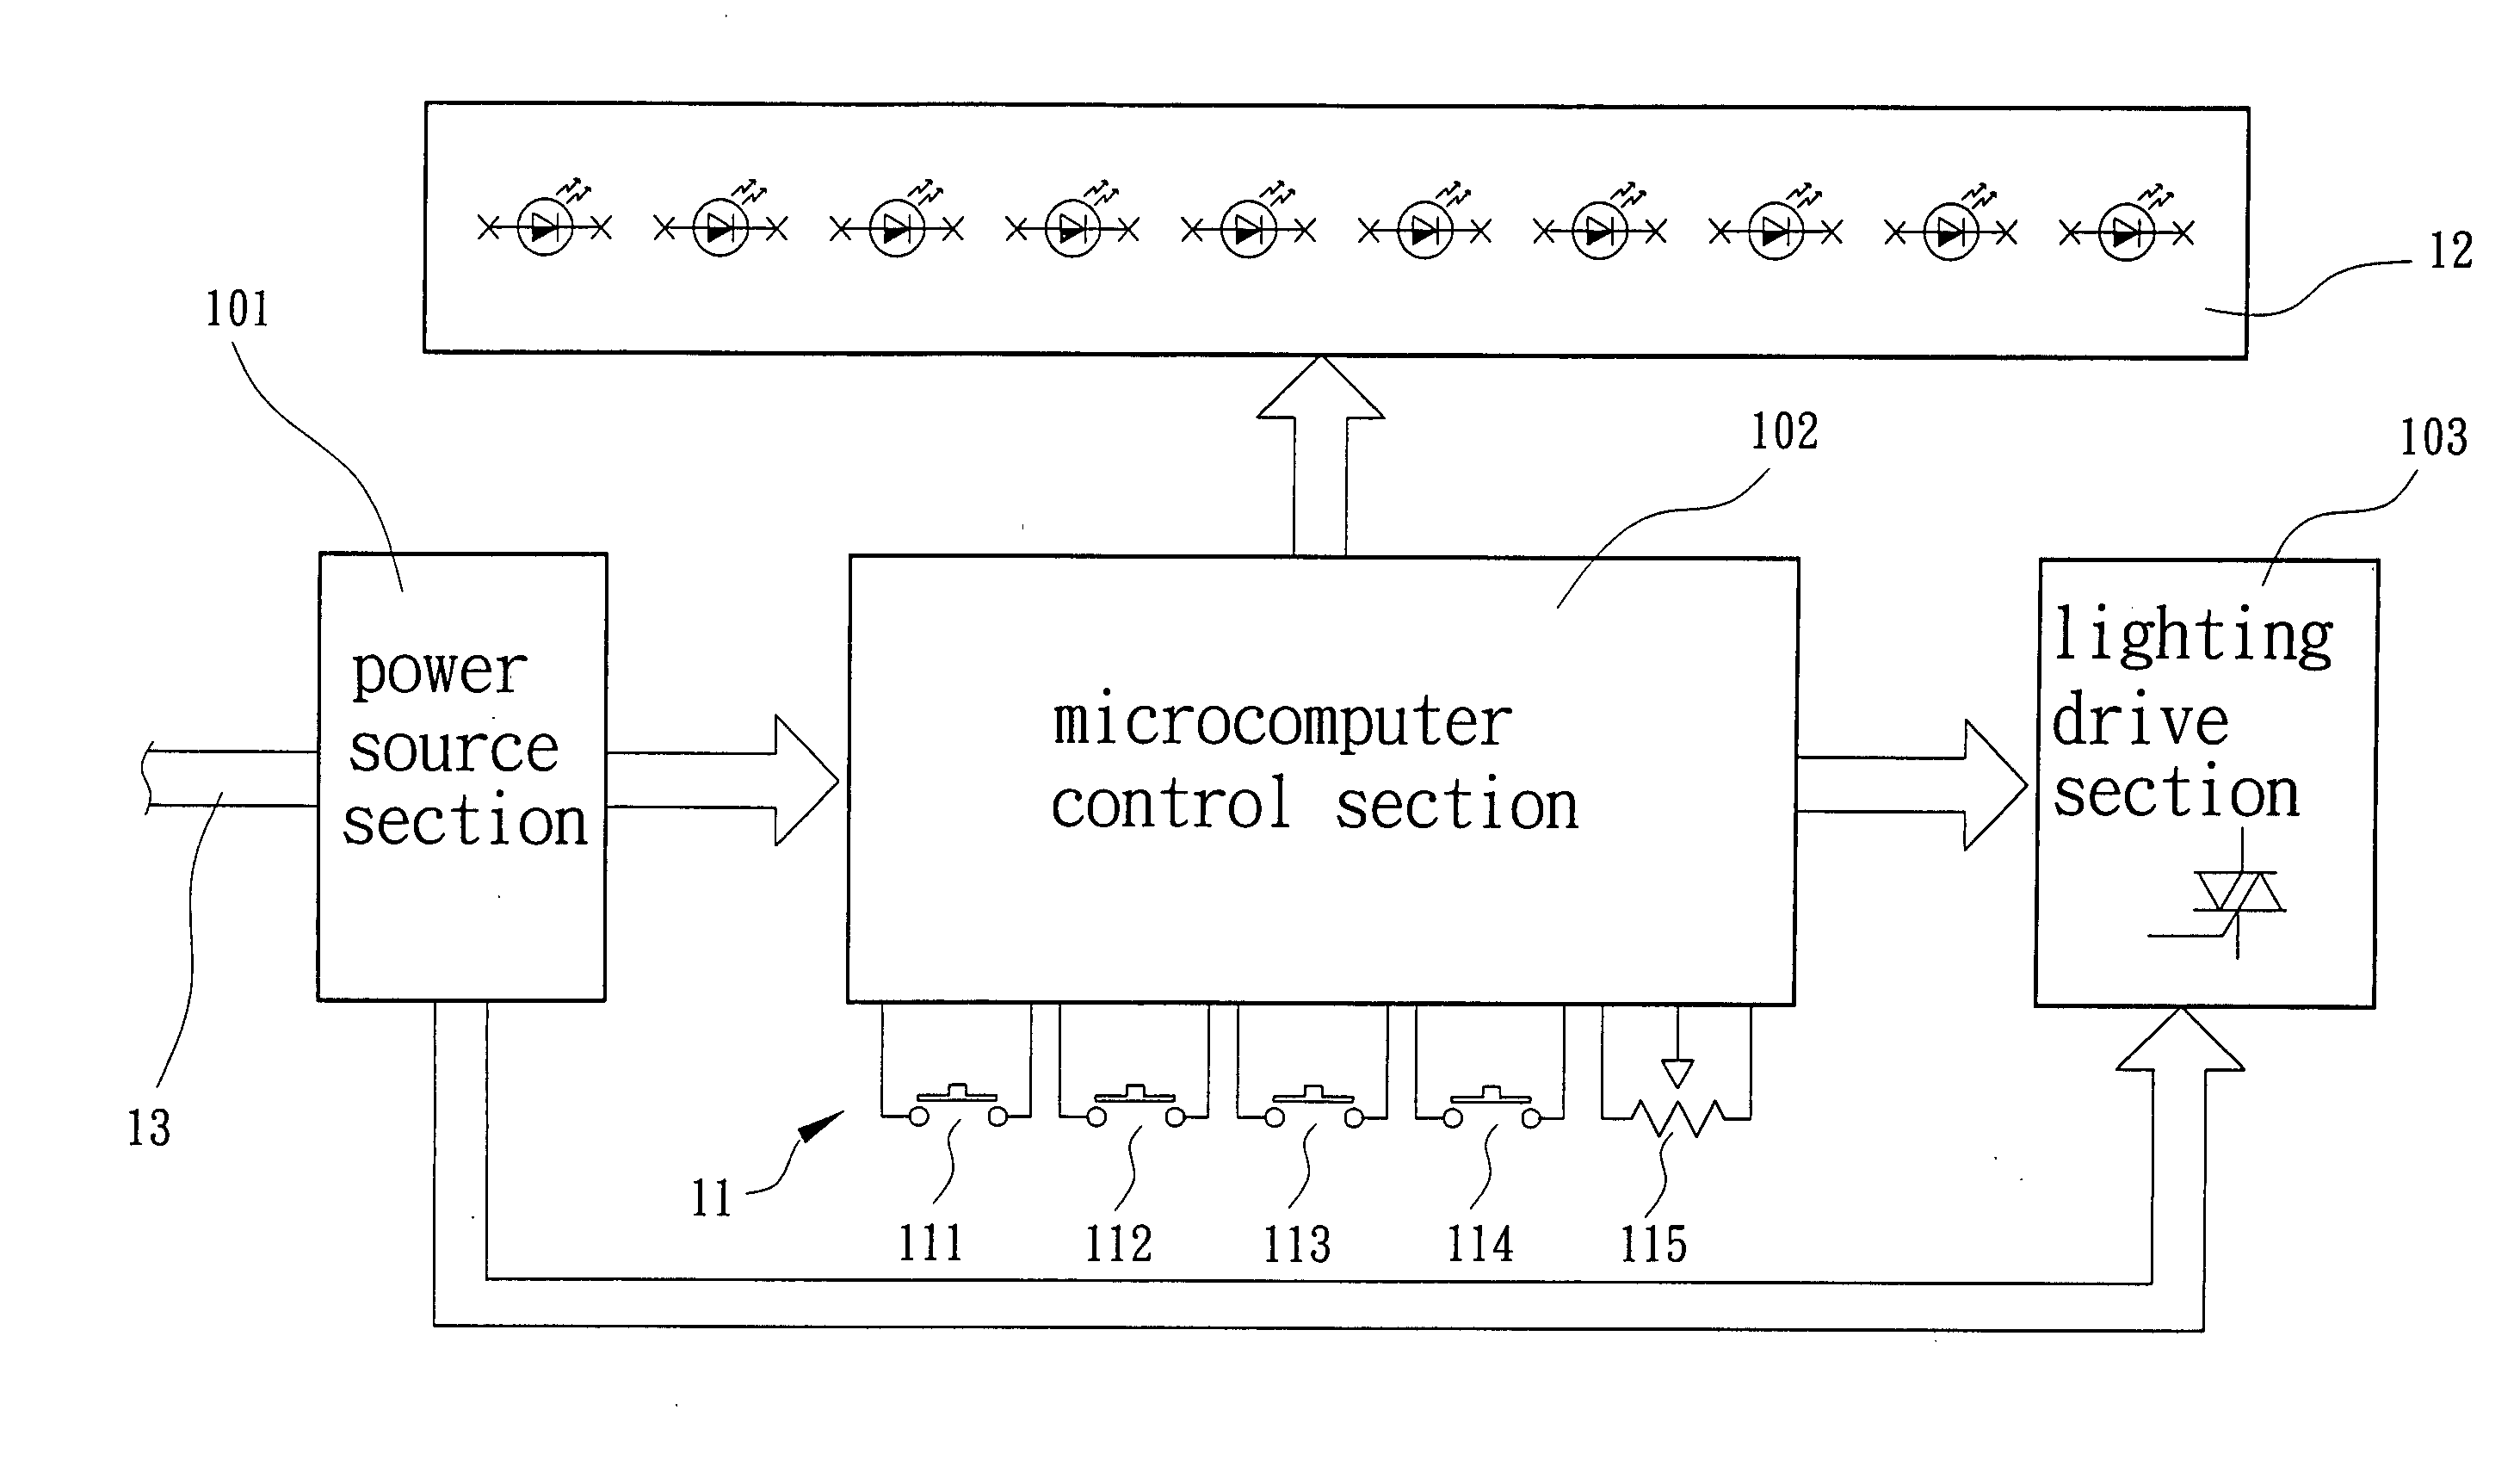 Dimming adjusting/controlling device of an illuminator